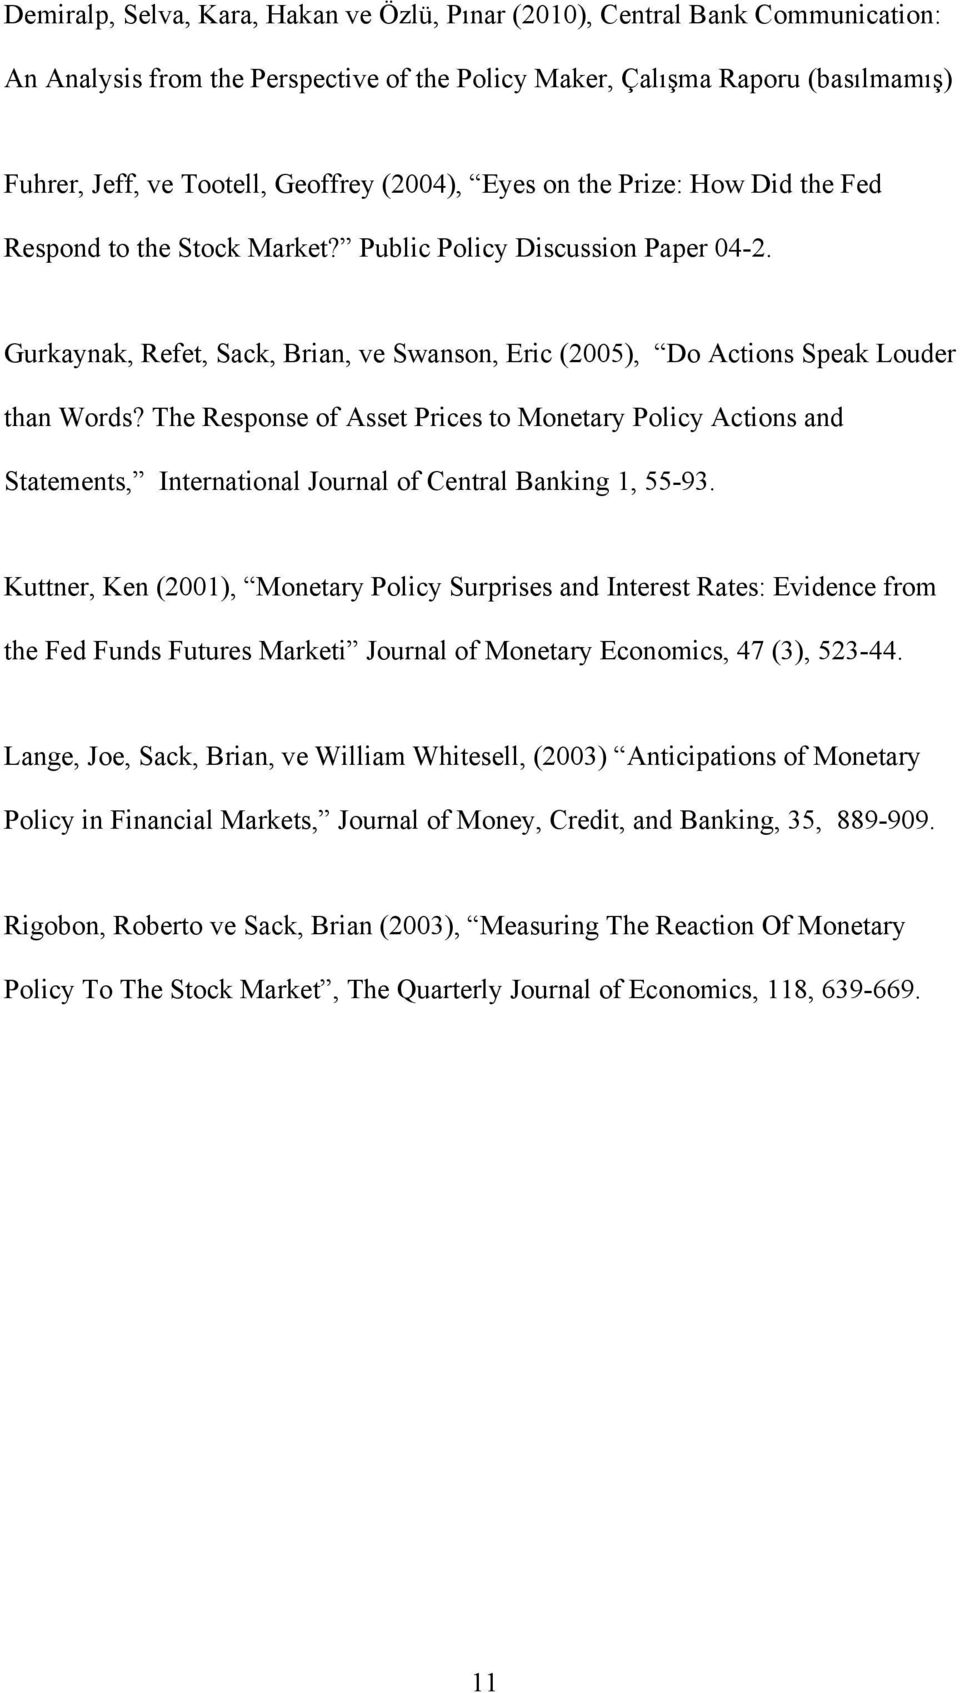 The Response of Asset Prices to Monetary Policy Actions and Statements, International Journal of Central Banking 1, 55-93.